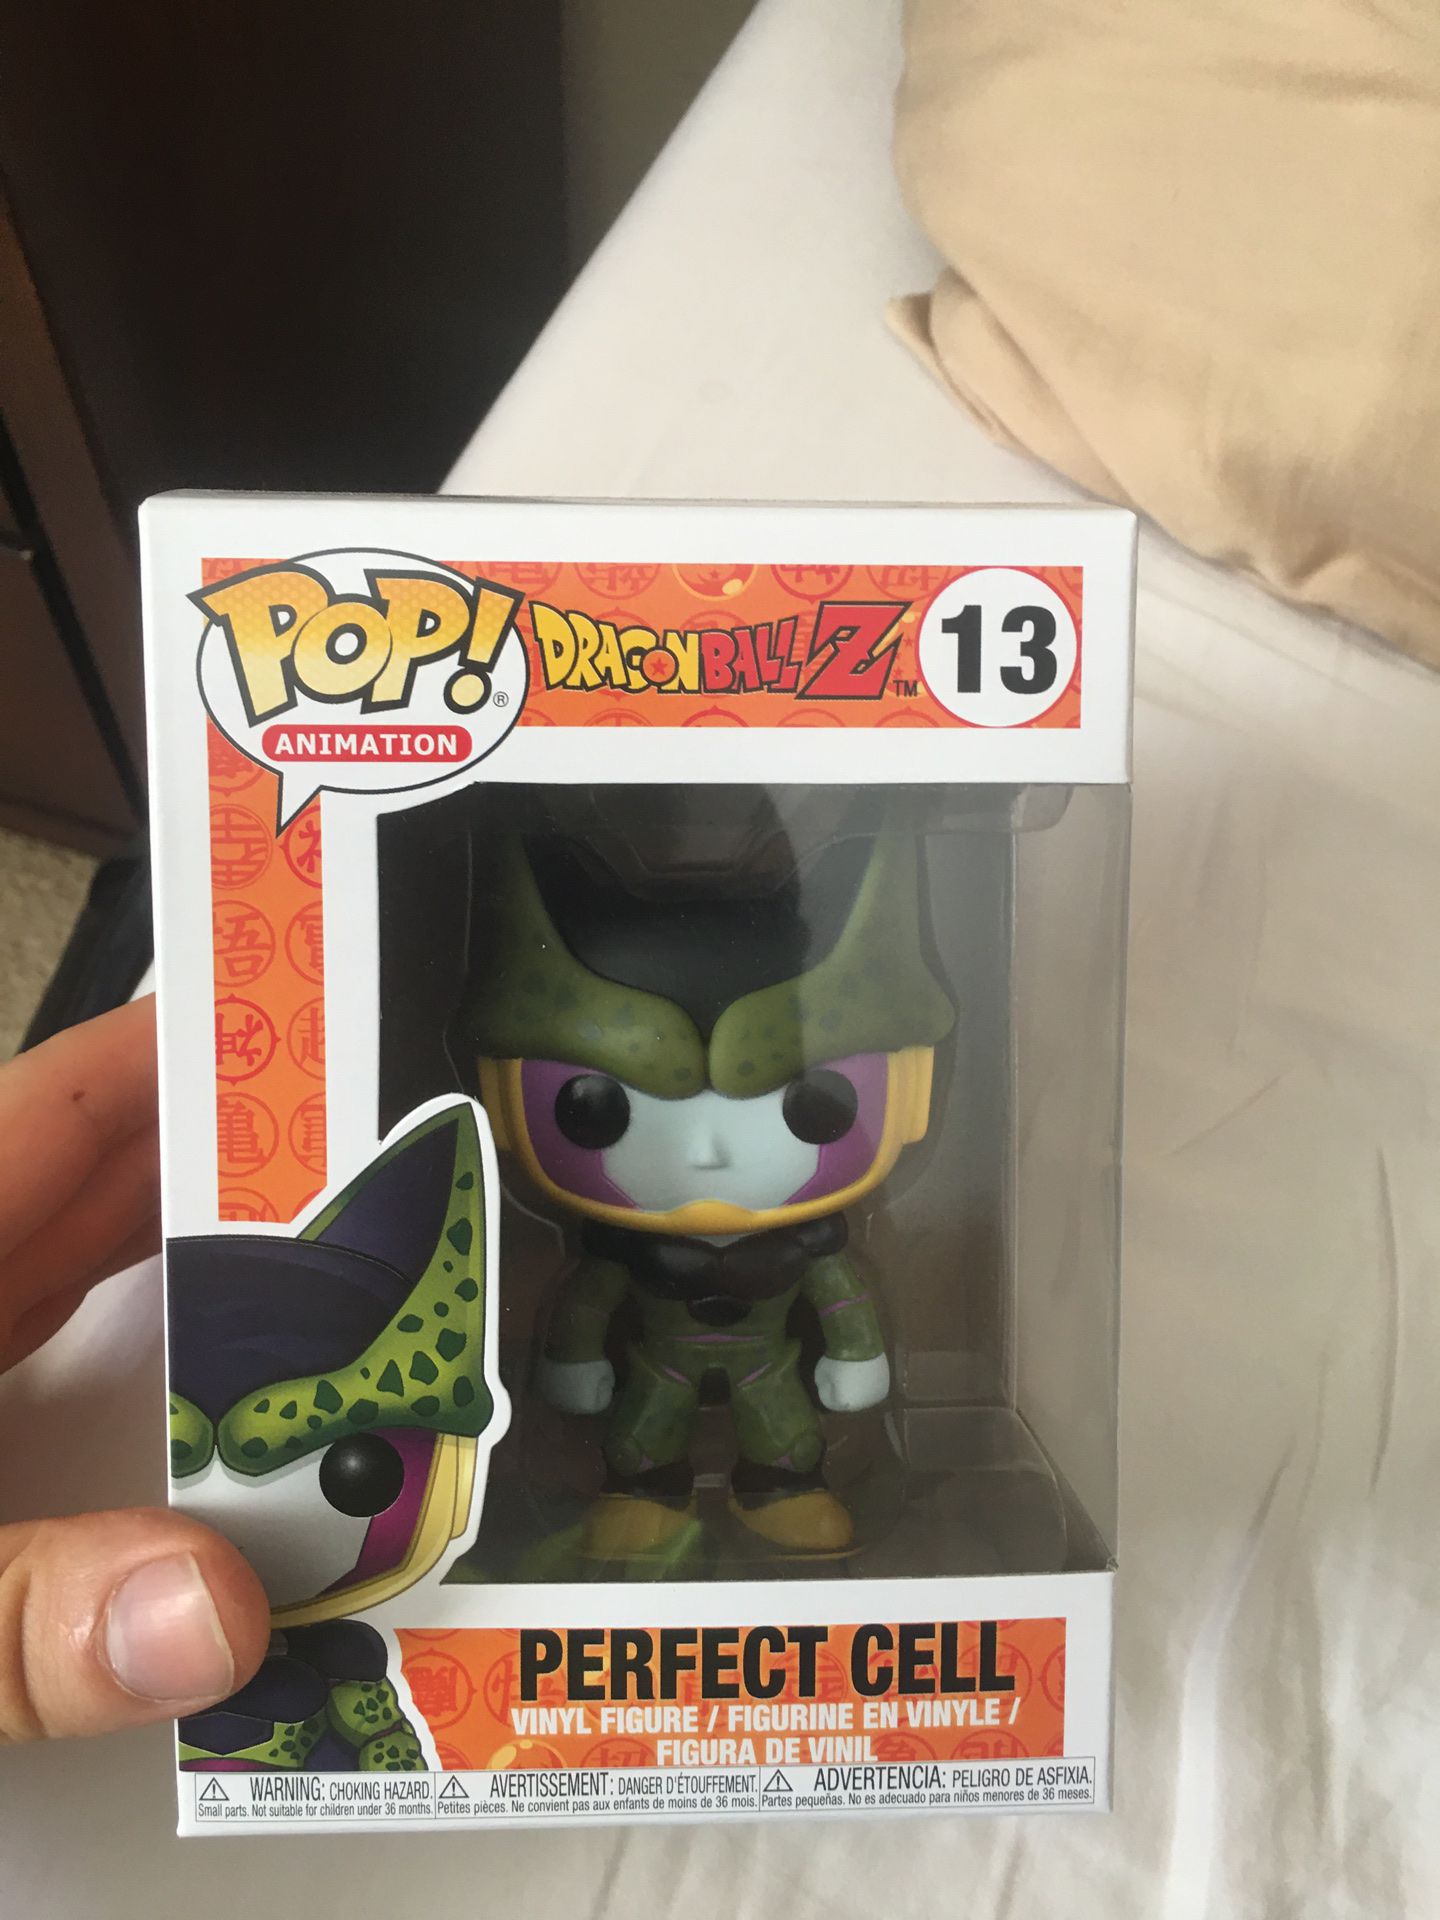 Perfect cell dragonball Funko pop (trade also accepted)